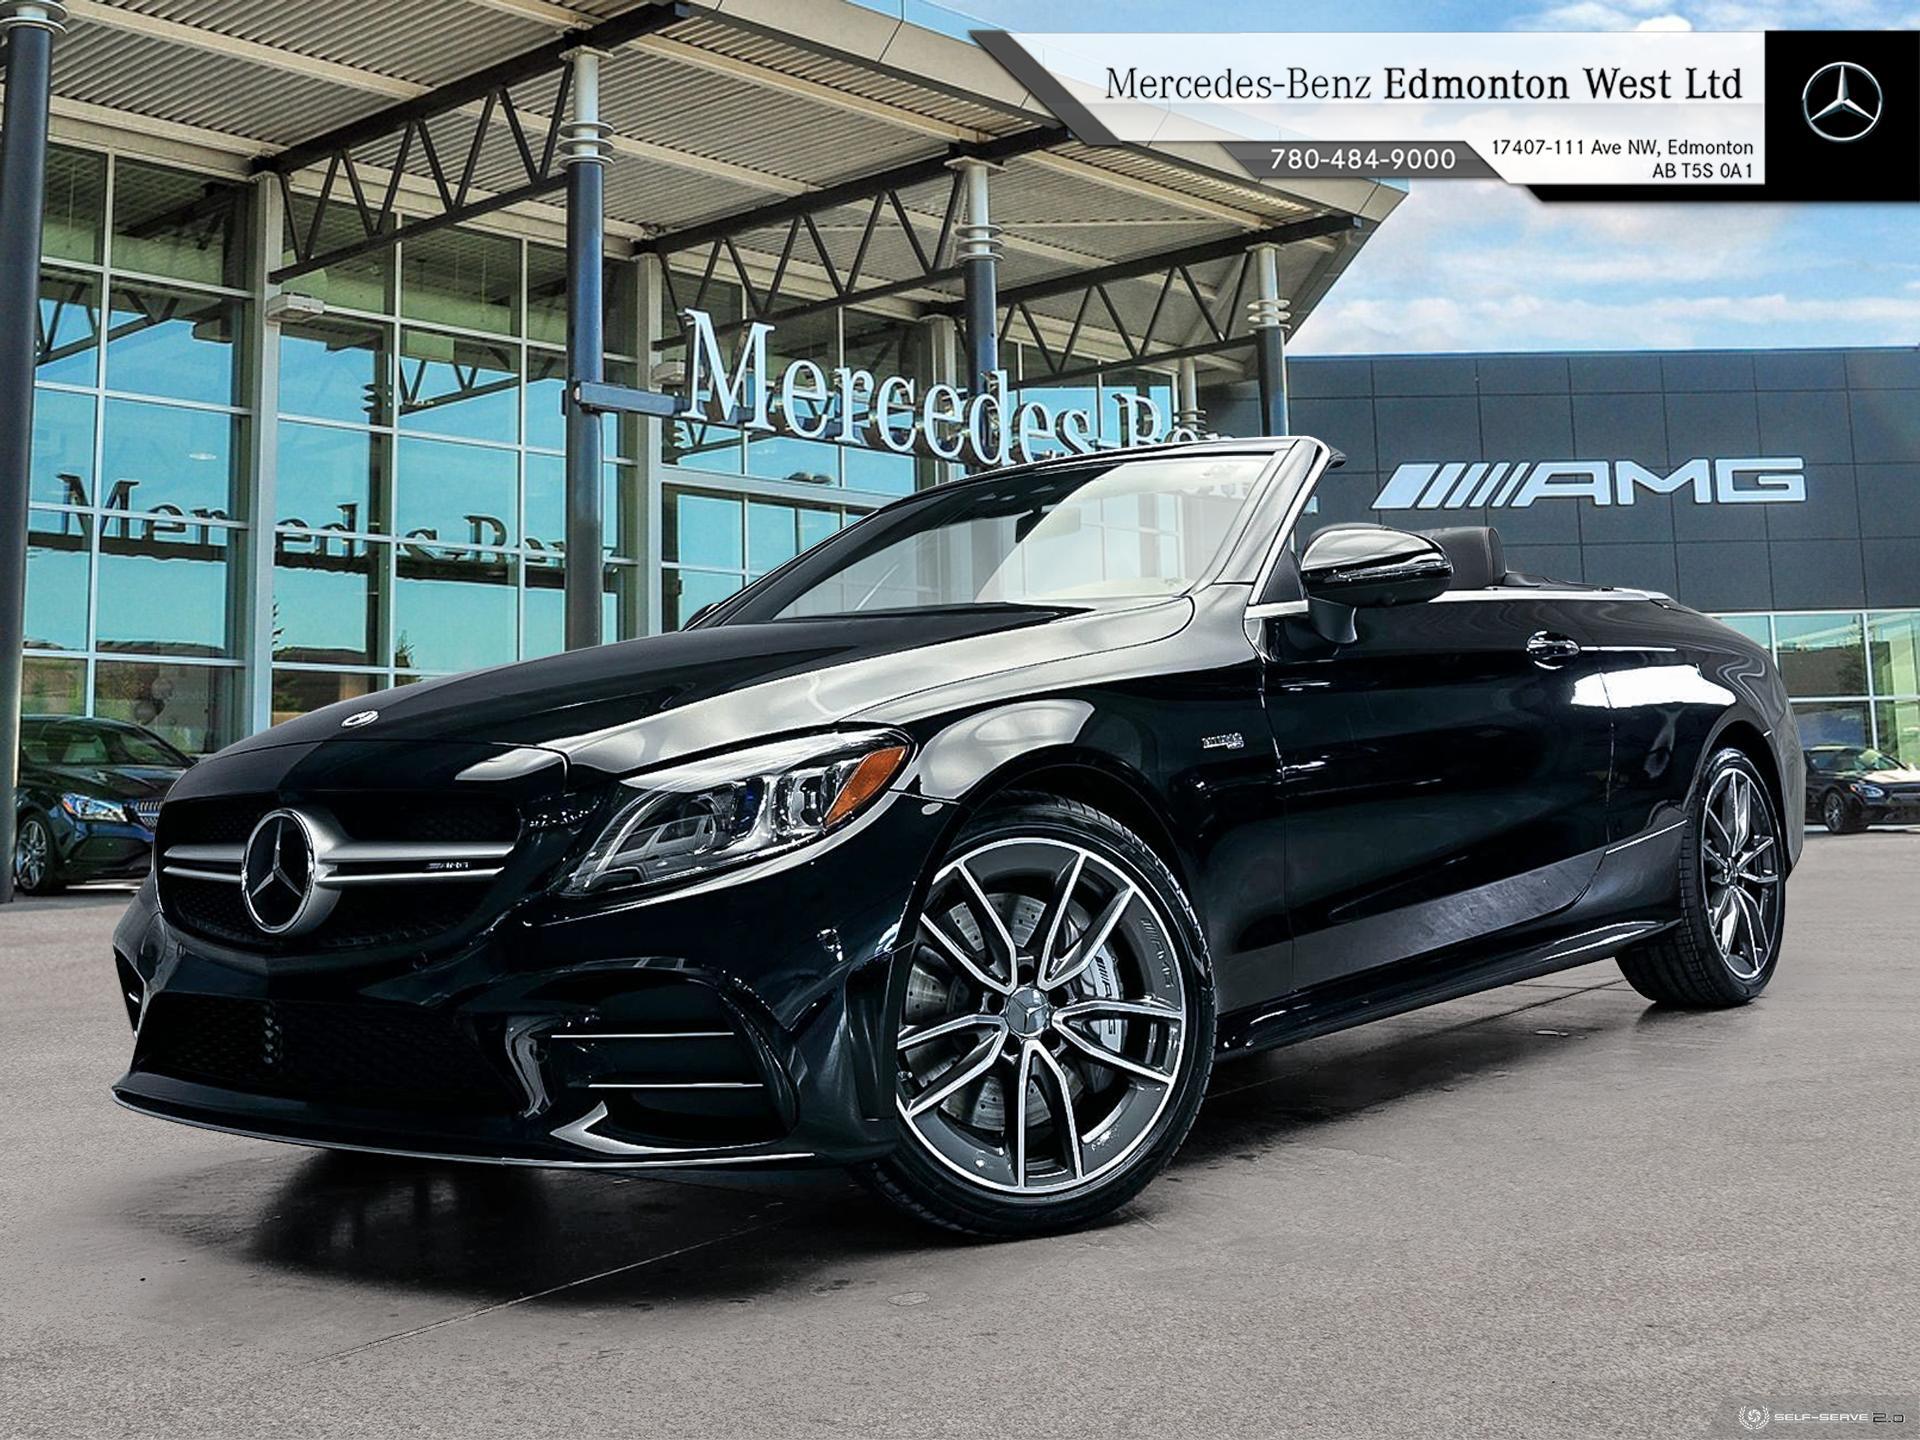 2023 Mercedes-Benz C-Class AMG C 43 4MATIC Cabriolet  LAST ONE! - 385HP AMG V